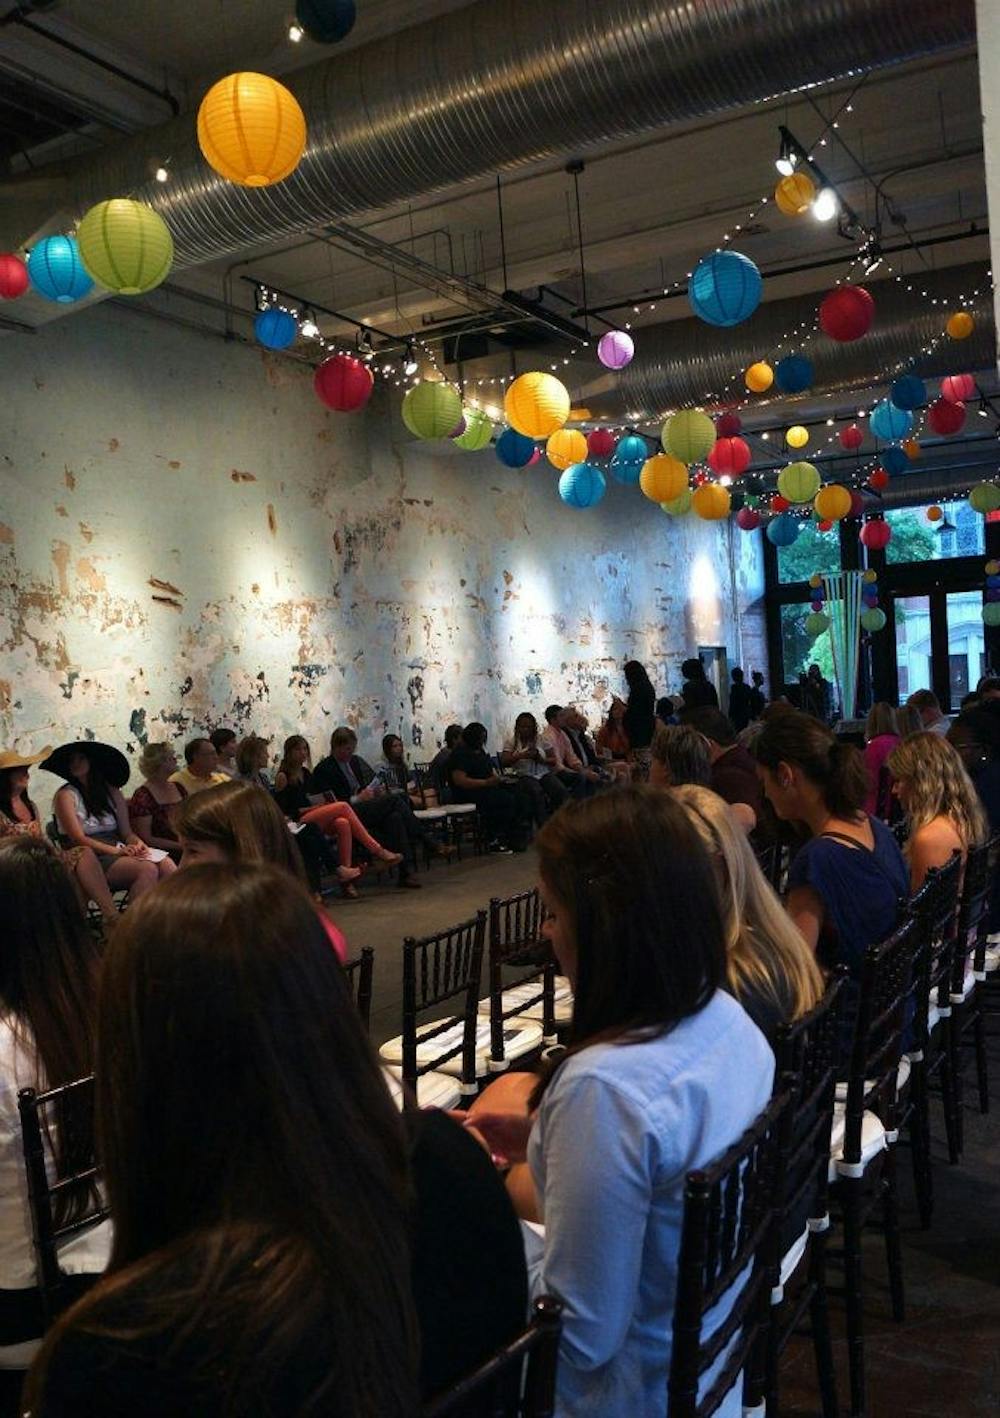 	<p>On Tuesday, Fashion Board at <span class="caps">USC</span> will host the Student Designer Showcase at 701 Whaley. Students will have the opportunity to show their collections.</p>